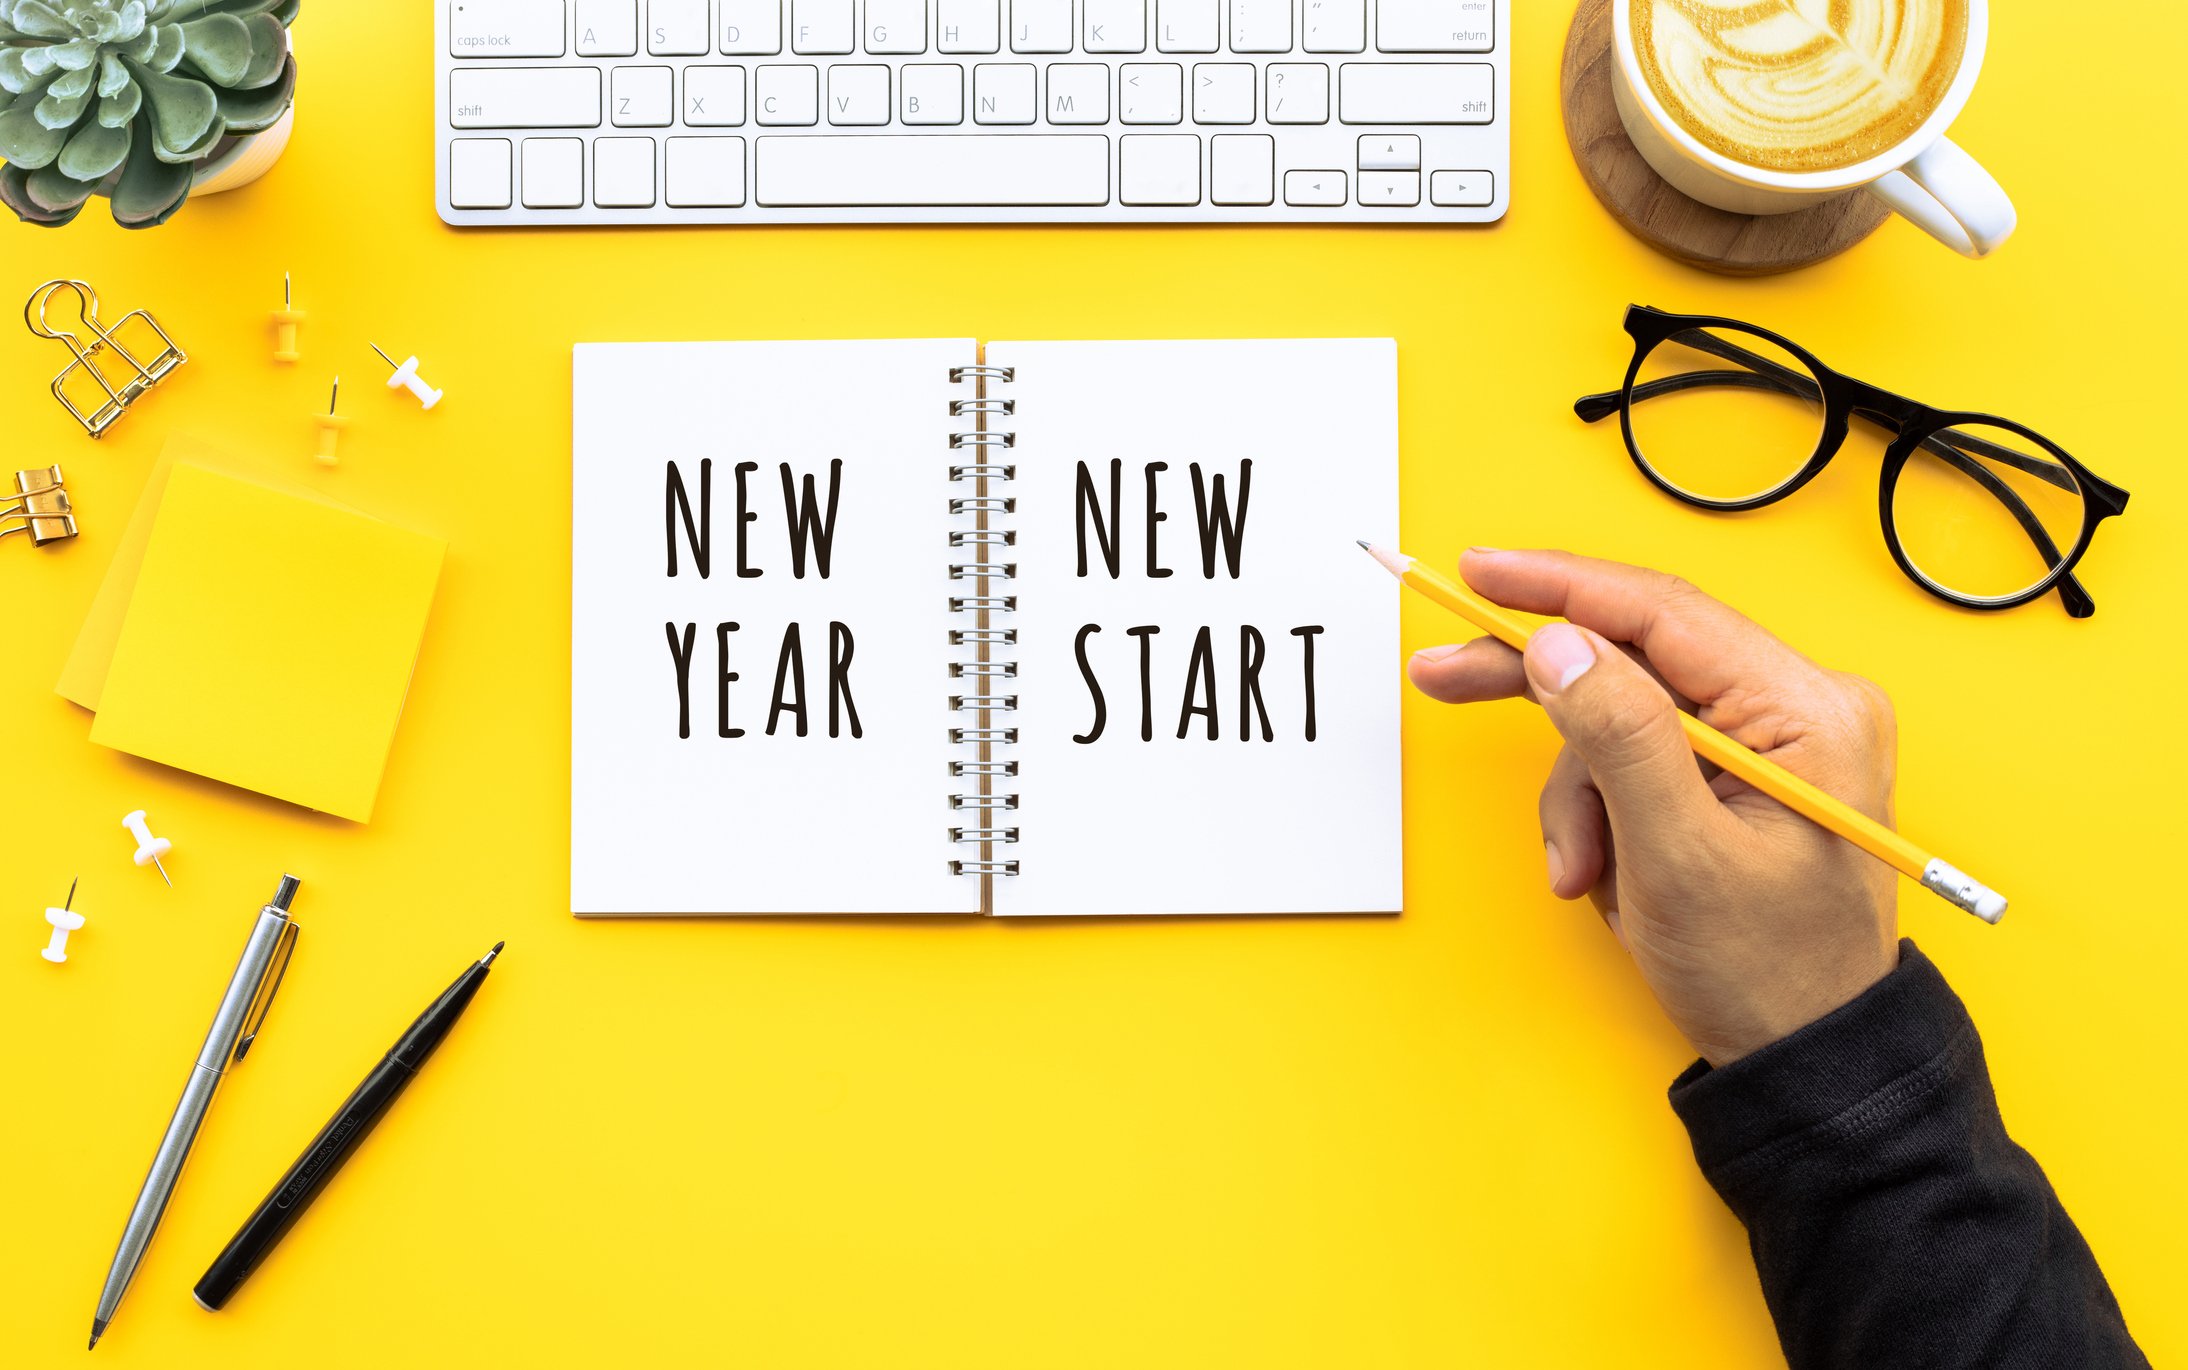 What s Your New Year s Resolution? Cornerstone Wealth Management